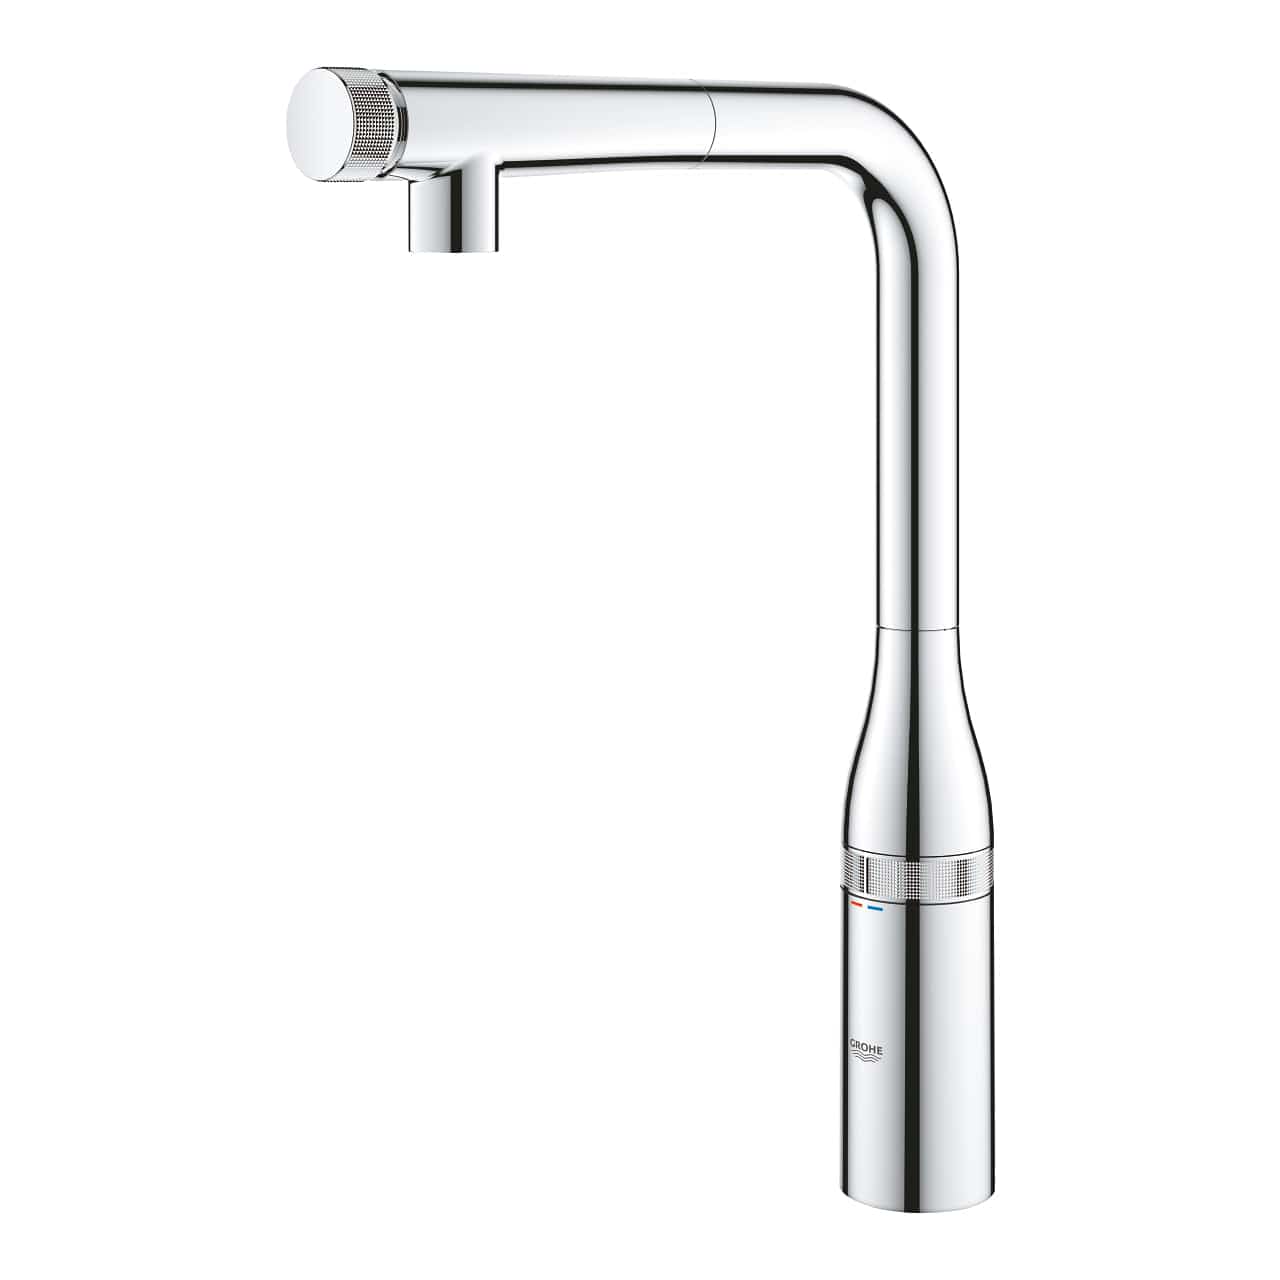 Grohe Essence Smart Control Sink Mixer | Supply Master | Accra, Ghana Kitchen Tap Buy Tools hardware Building materials